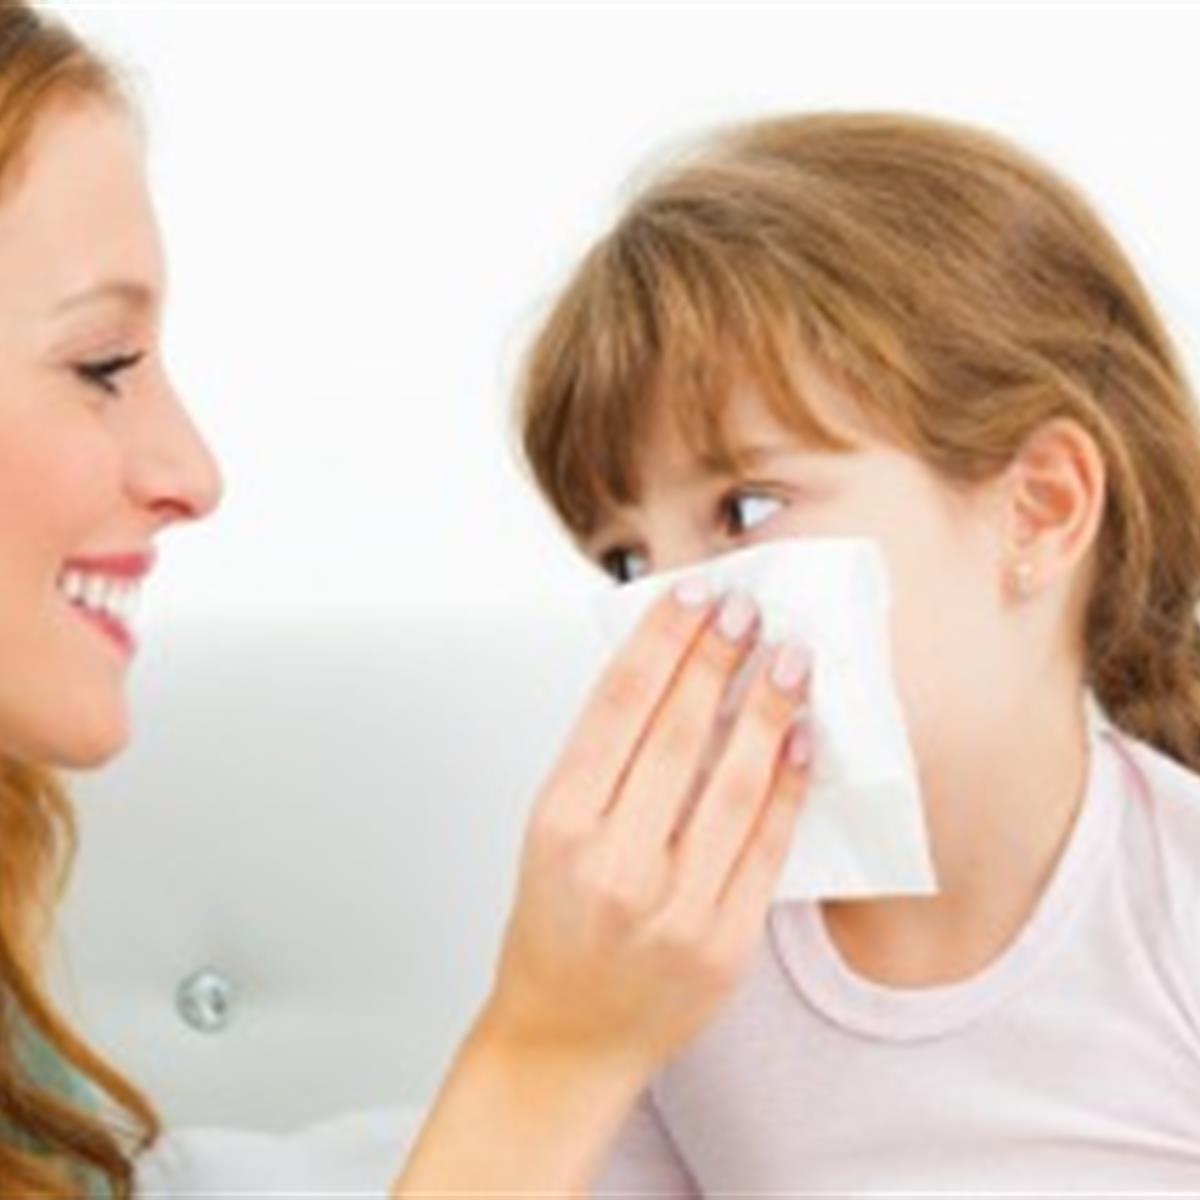 How to Stop a Nosebleed - HealthyChildren.org